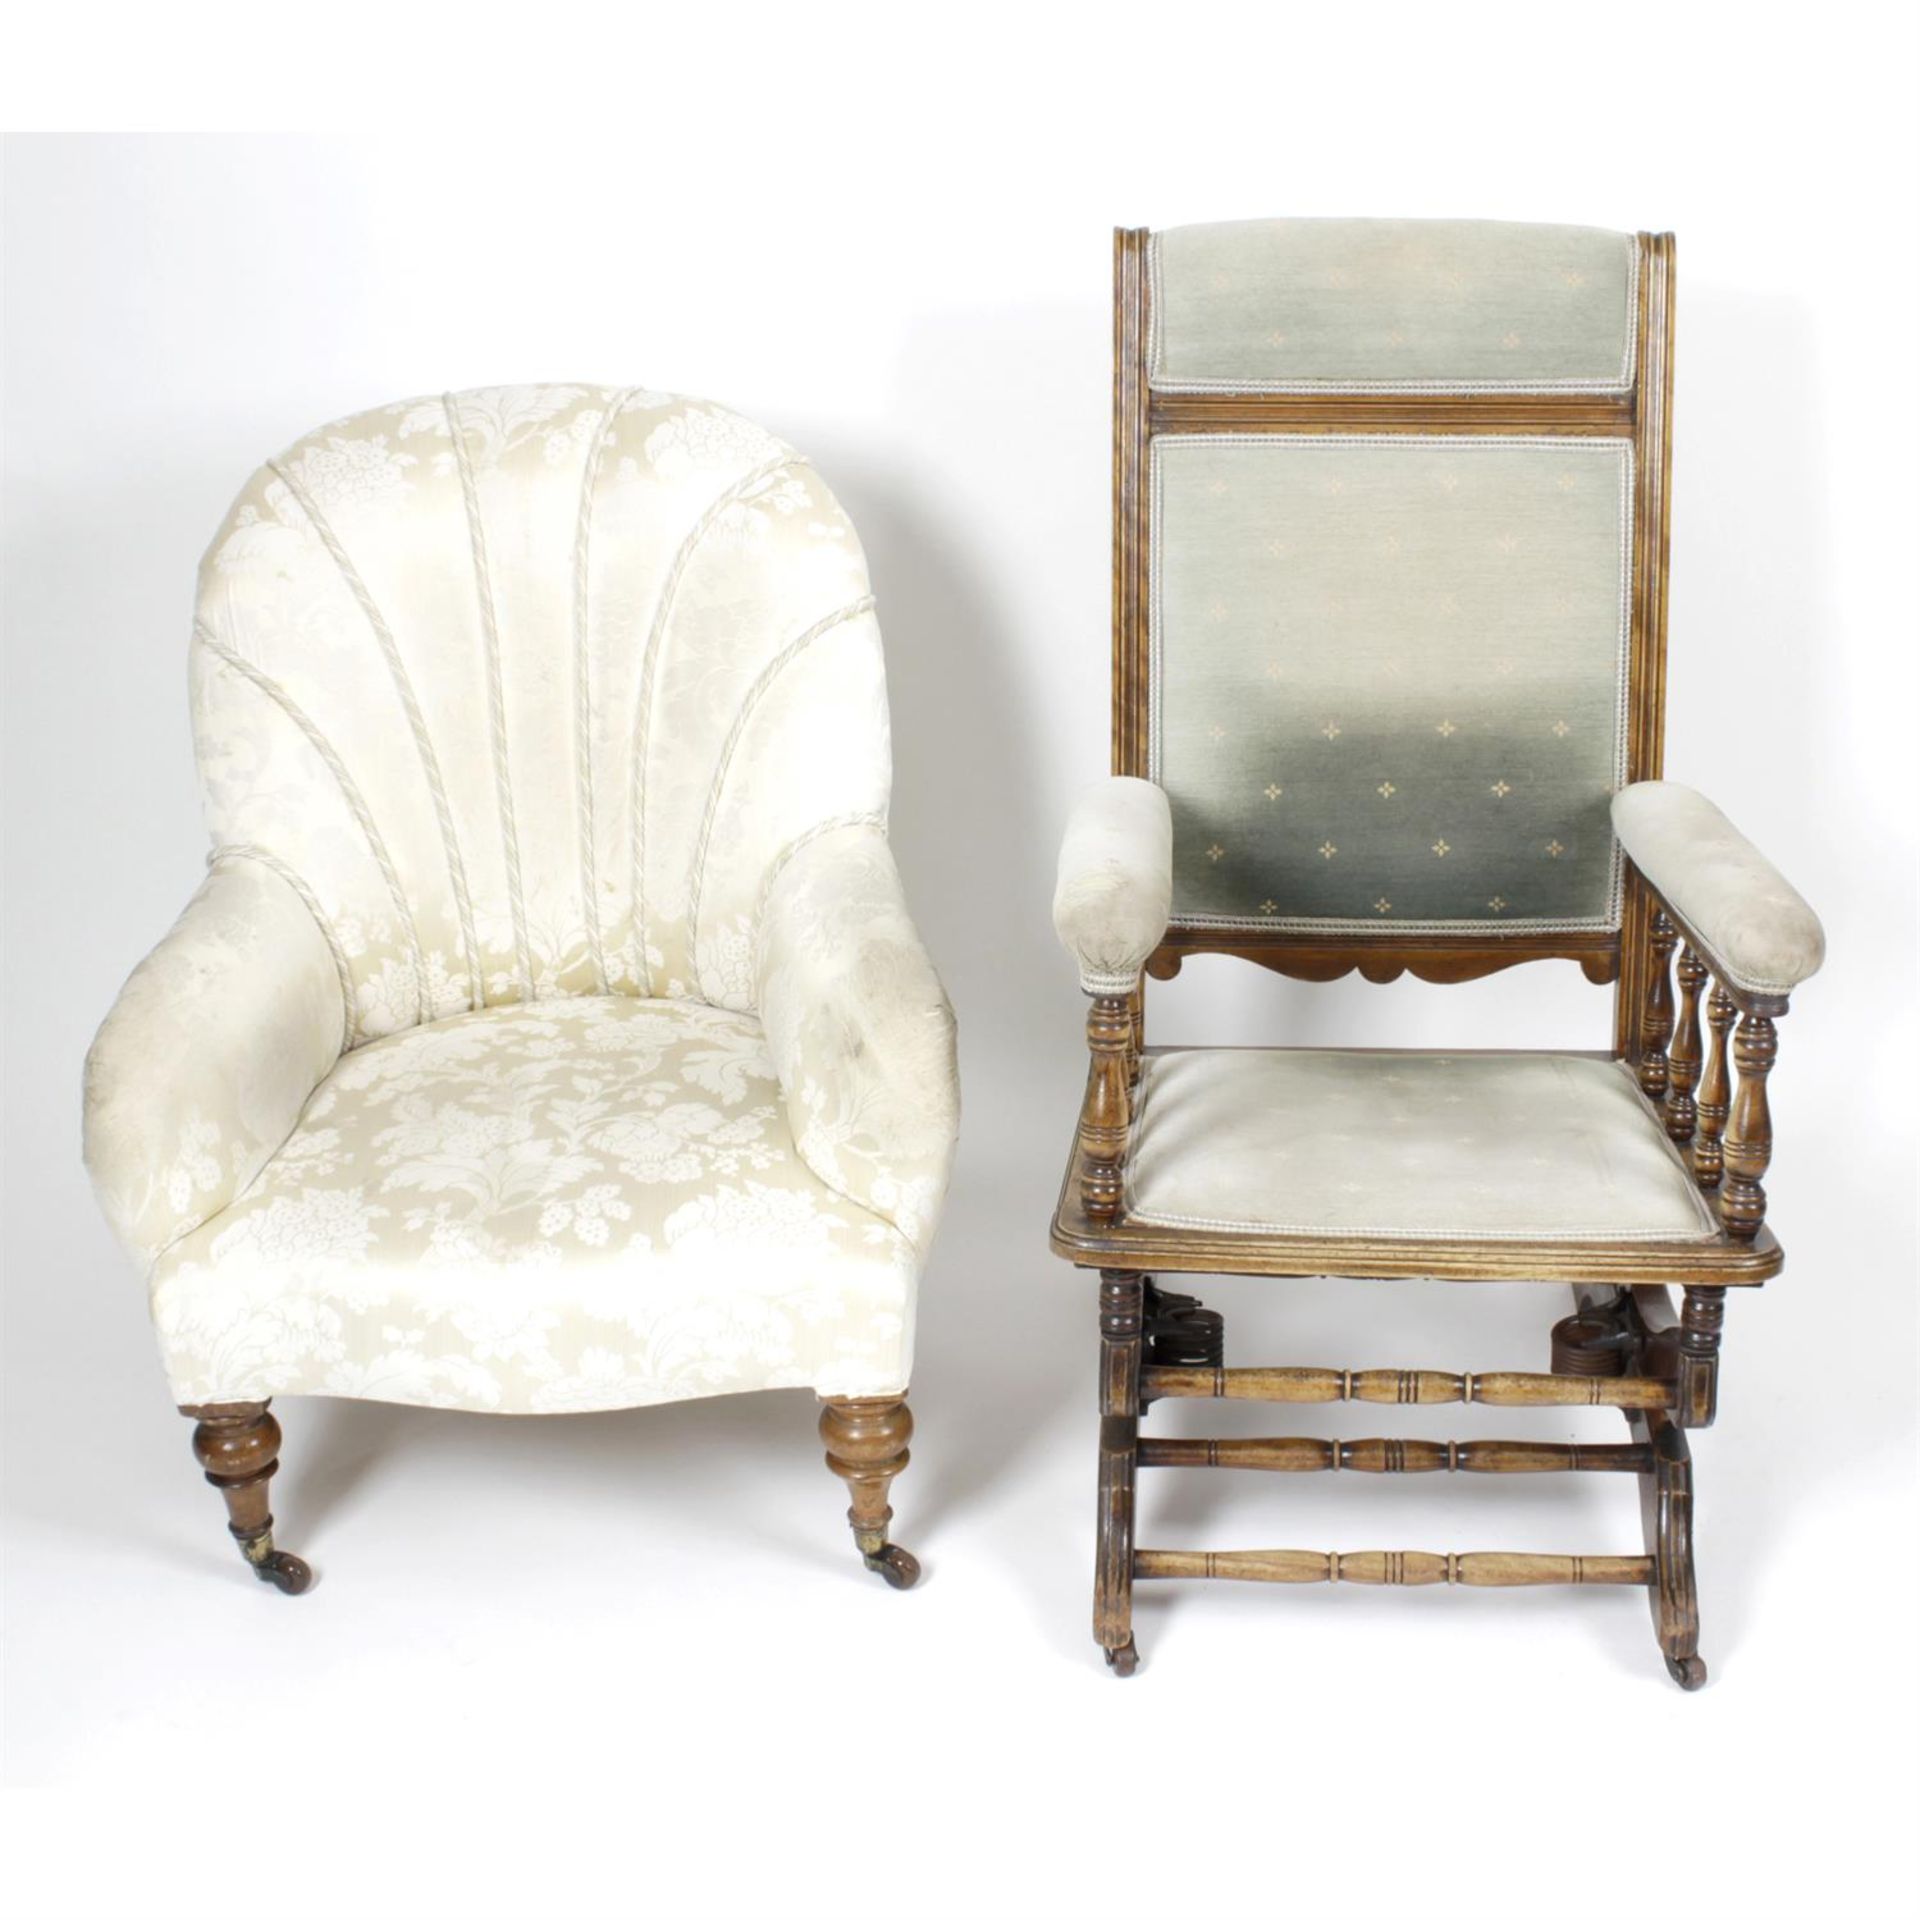 An early 20th century stained wooden framed American style rocking chair and similar nursing chair.